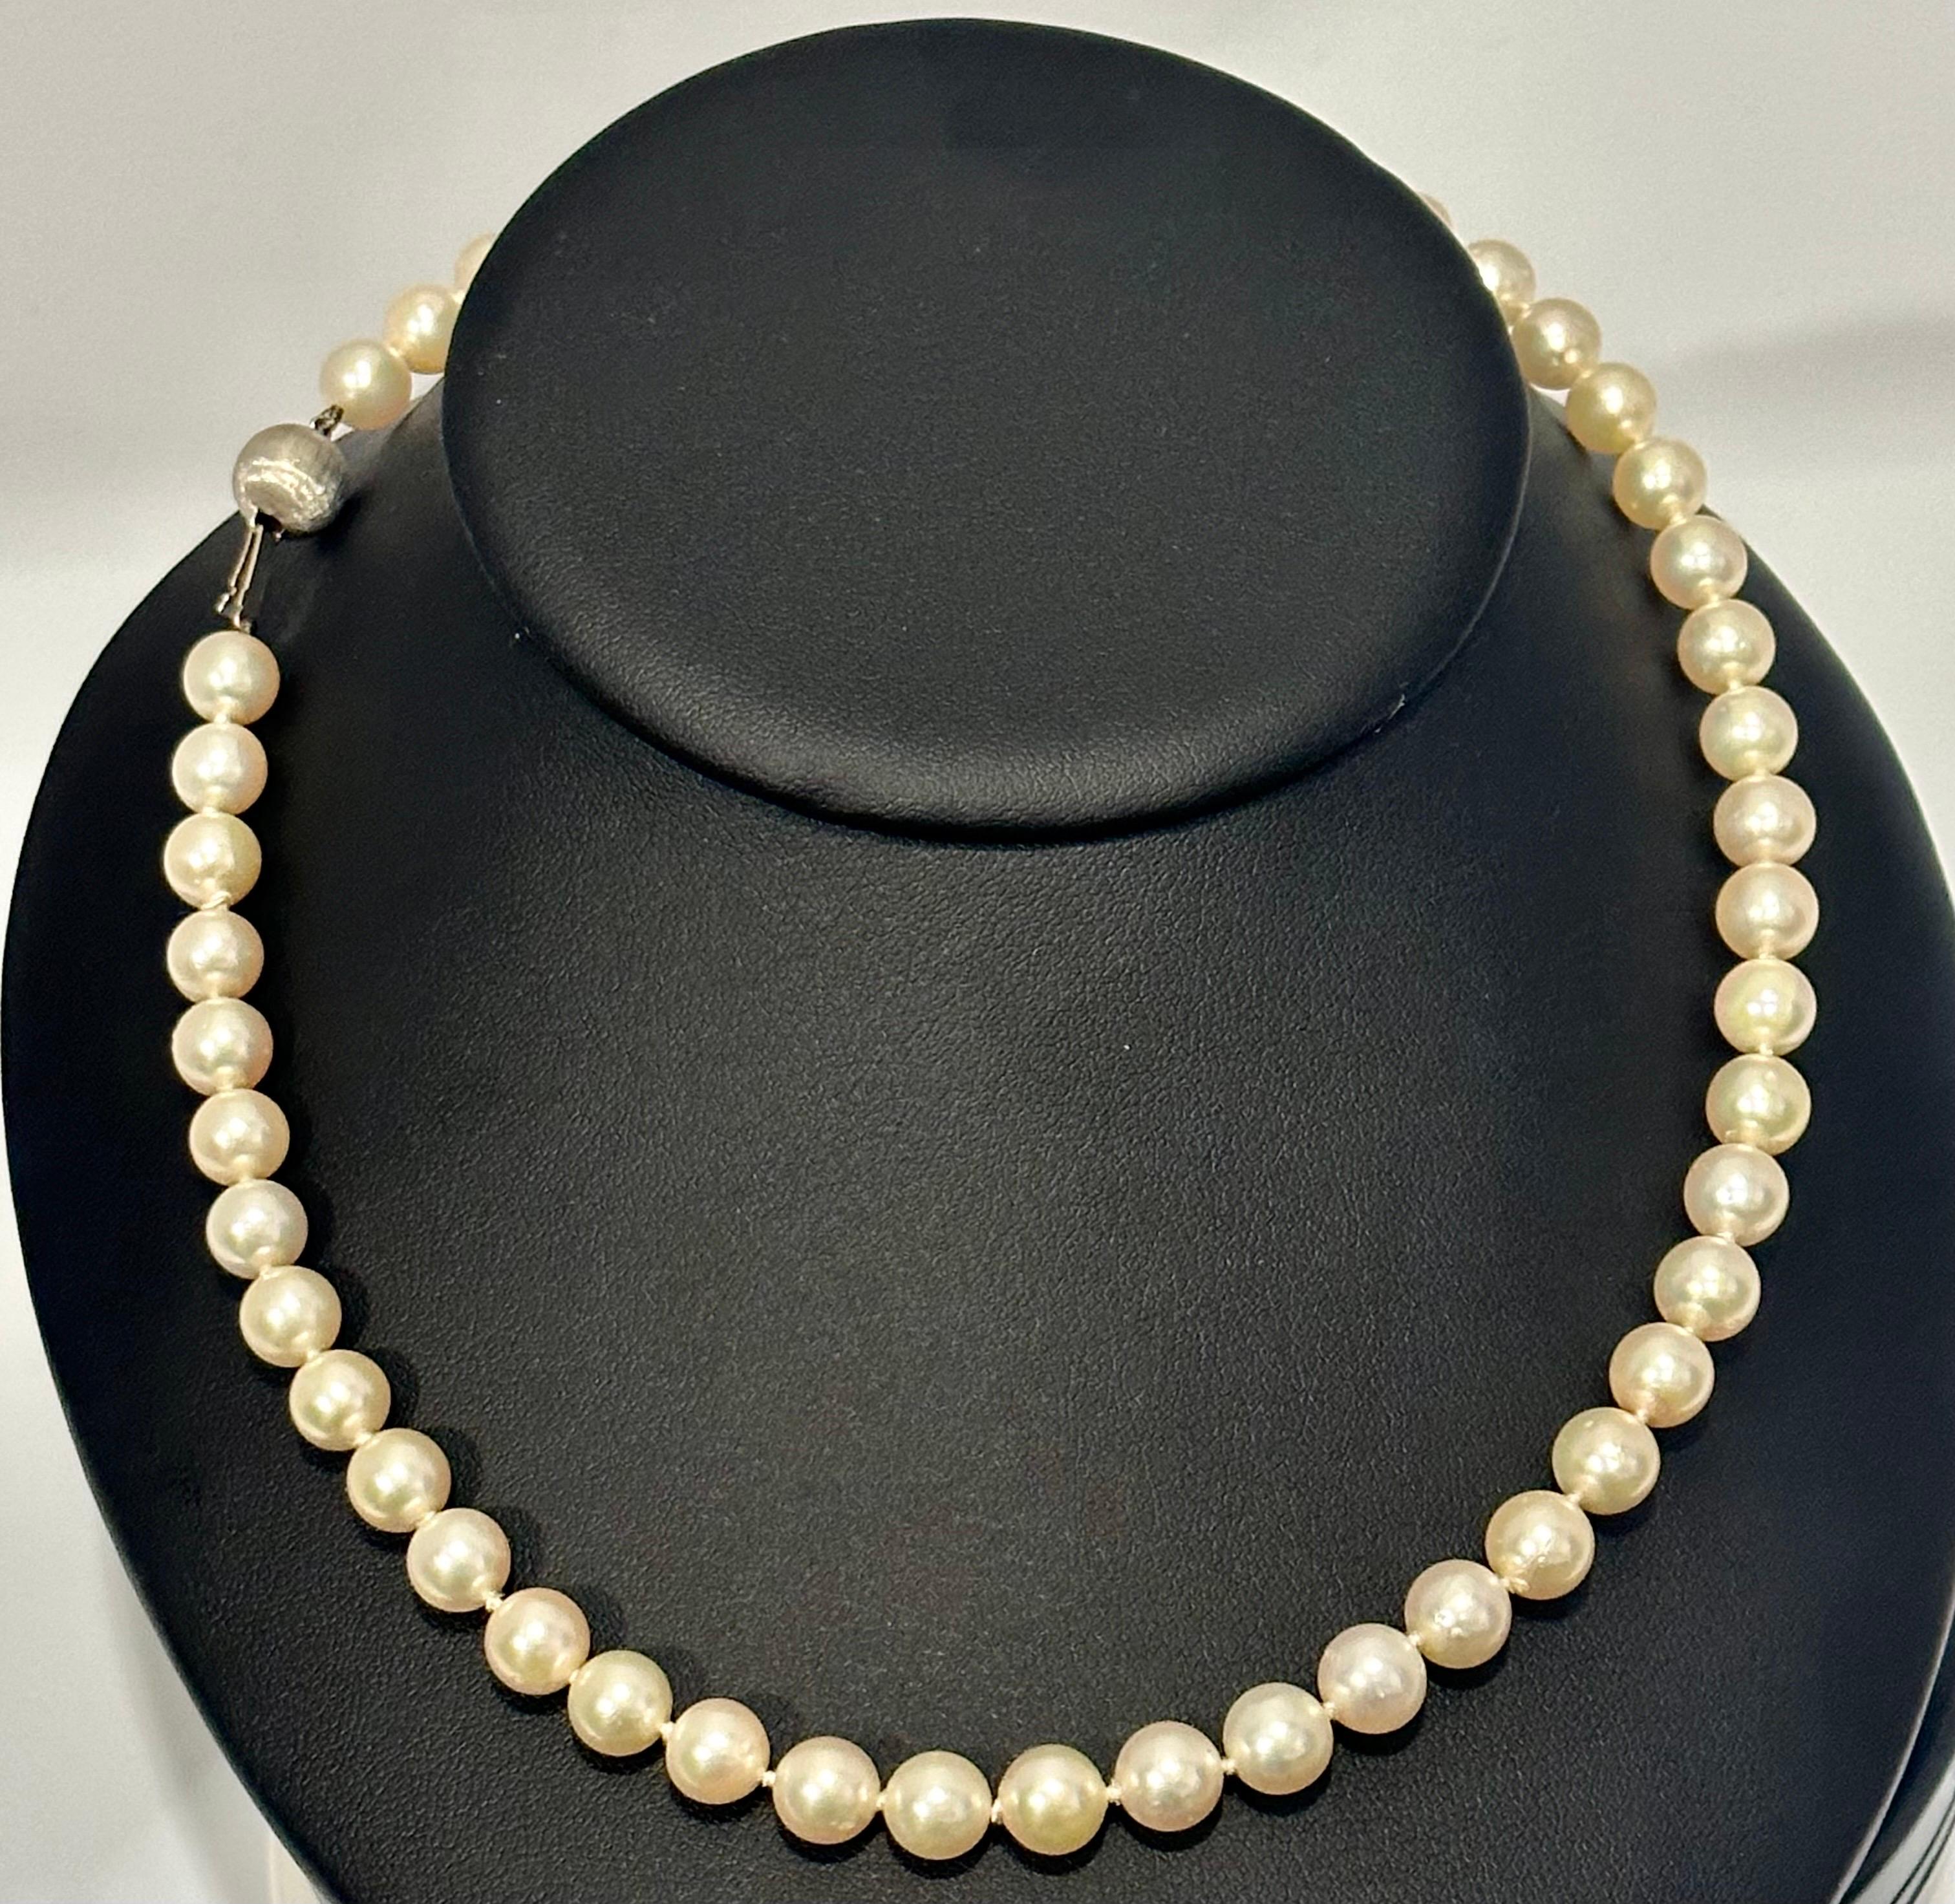 how much is a real pearl necklace worth